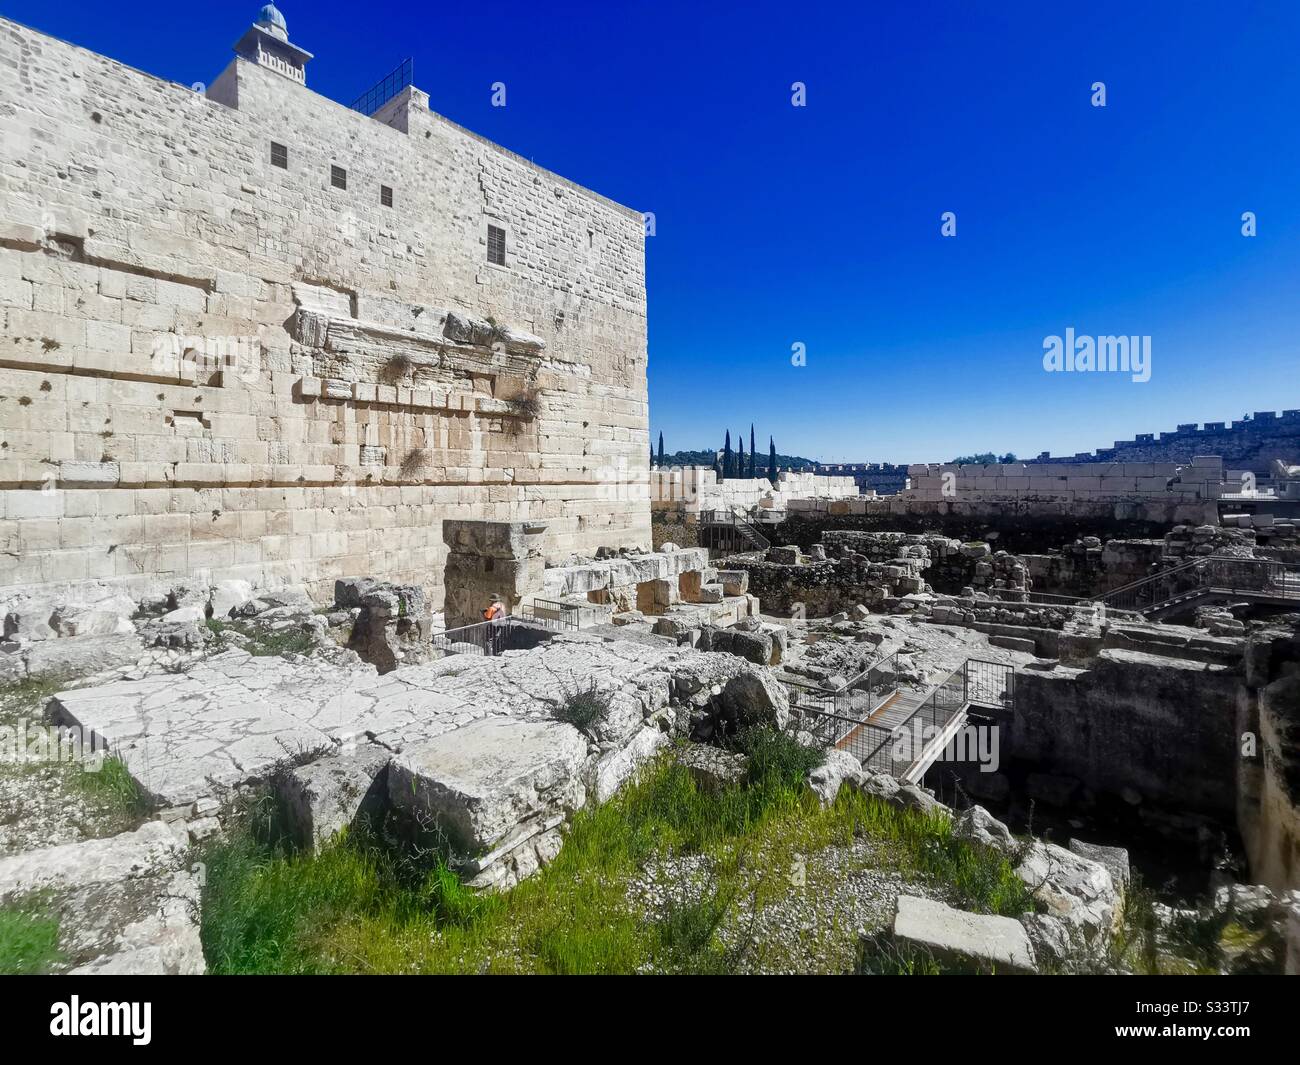 Remains of Robinson's Arch above the Herodian street. Stock Photo